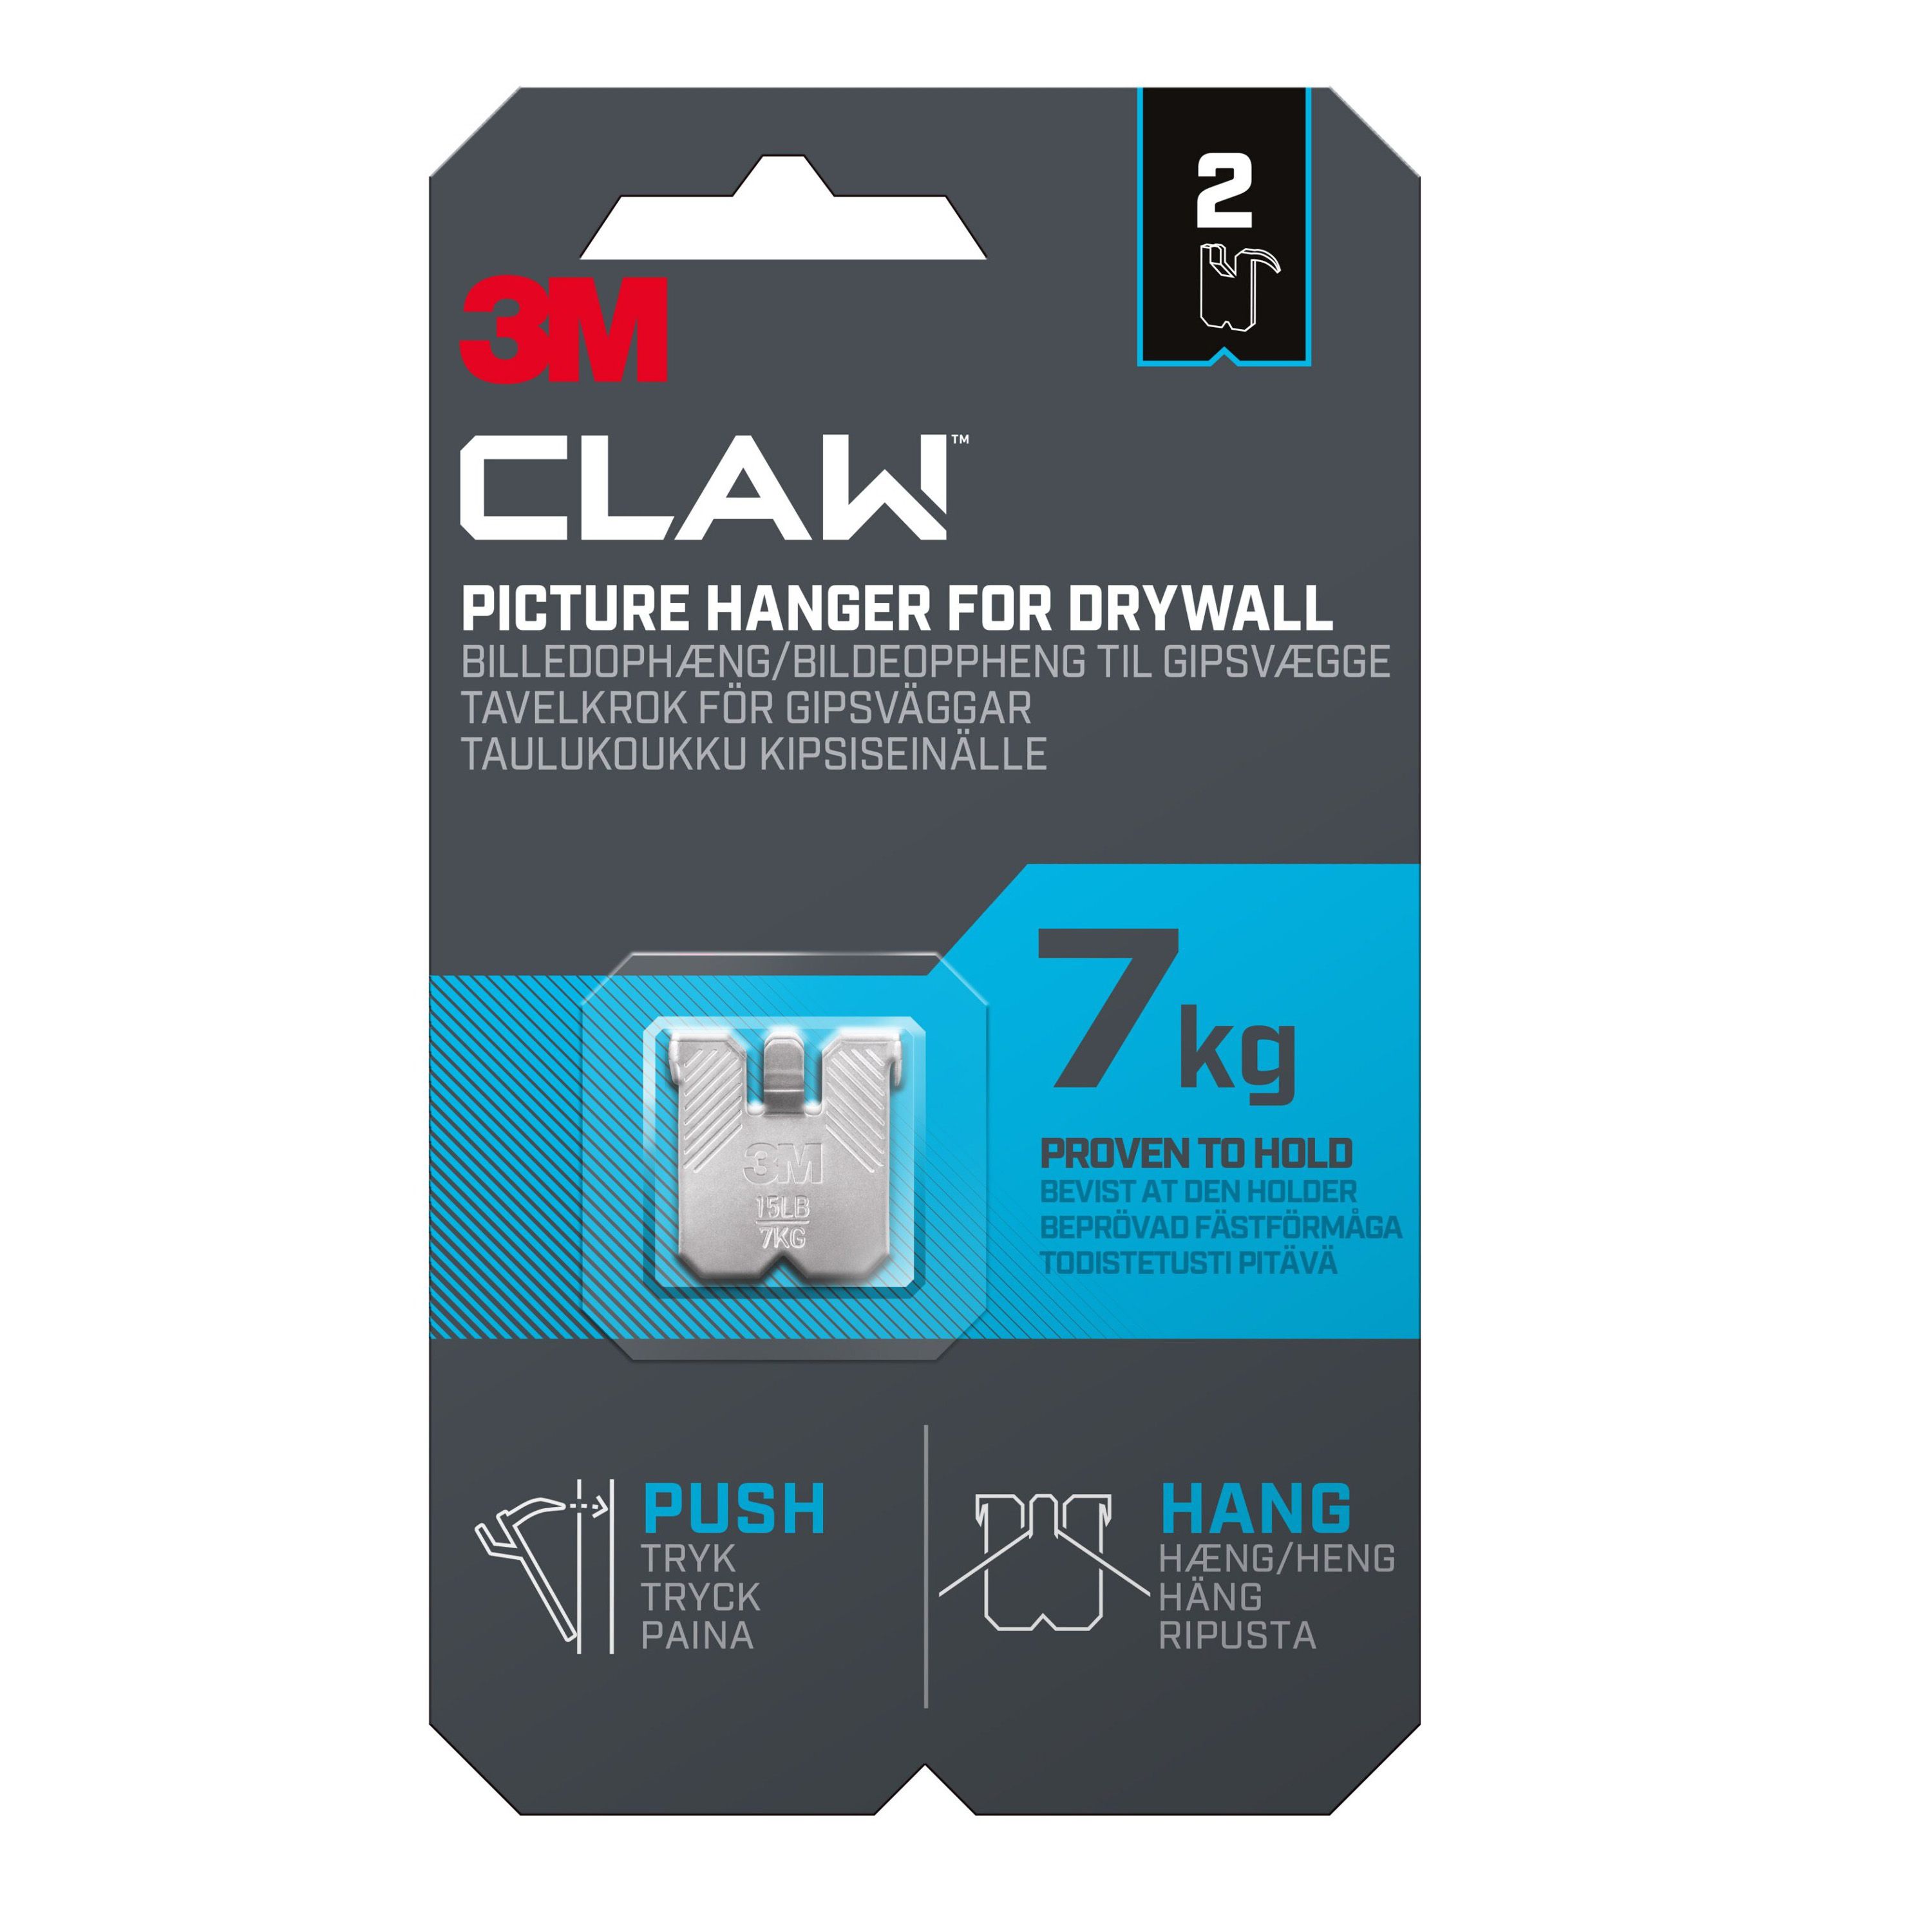 https://media.diy.com/is/image/Kingfisher/3m-claw-drywall-picture-hanger-h-23mm-w-23mm-pack-of-2~4064035002251_01c_bq?$MOB_PREV$&$width=618&$height=618